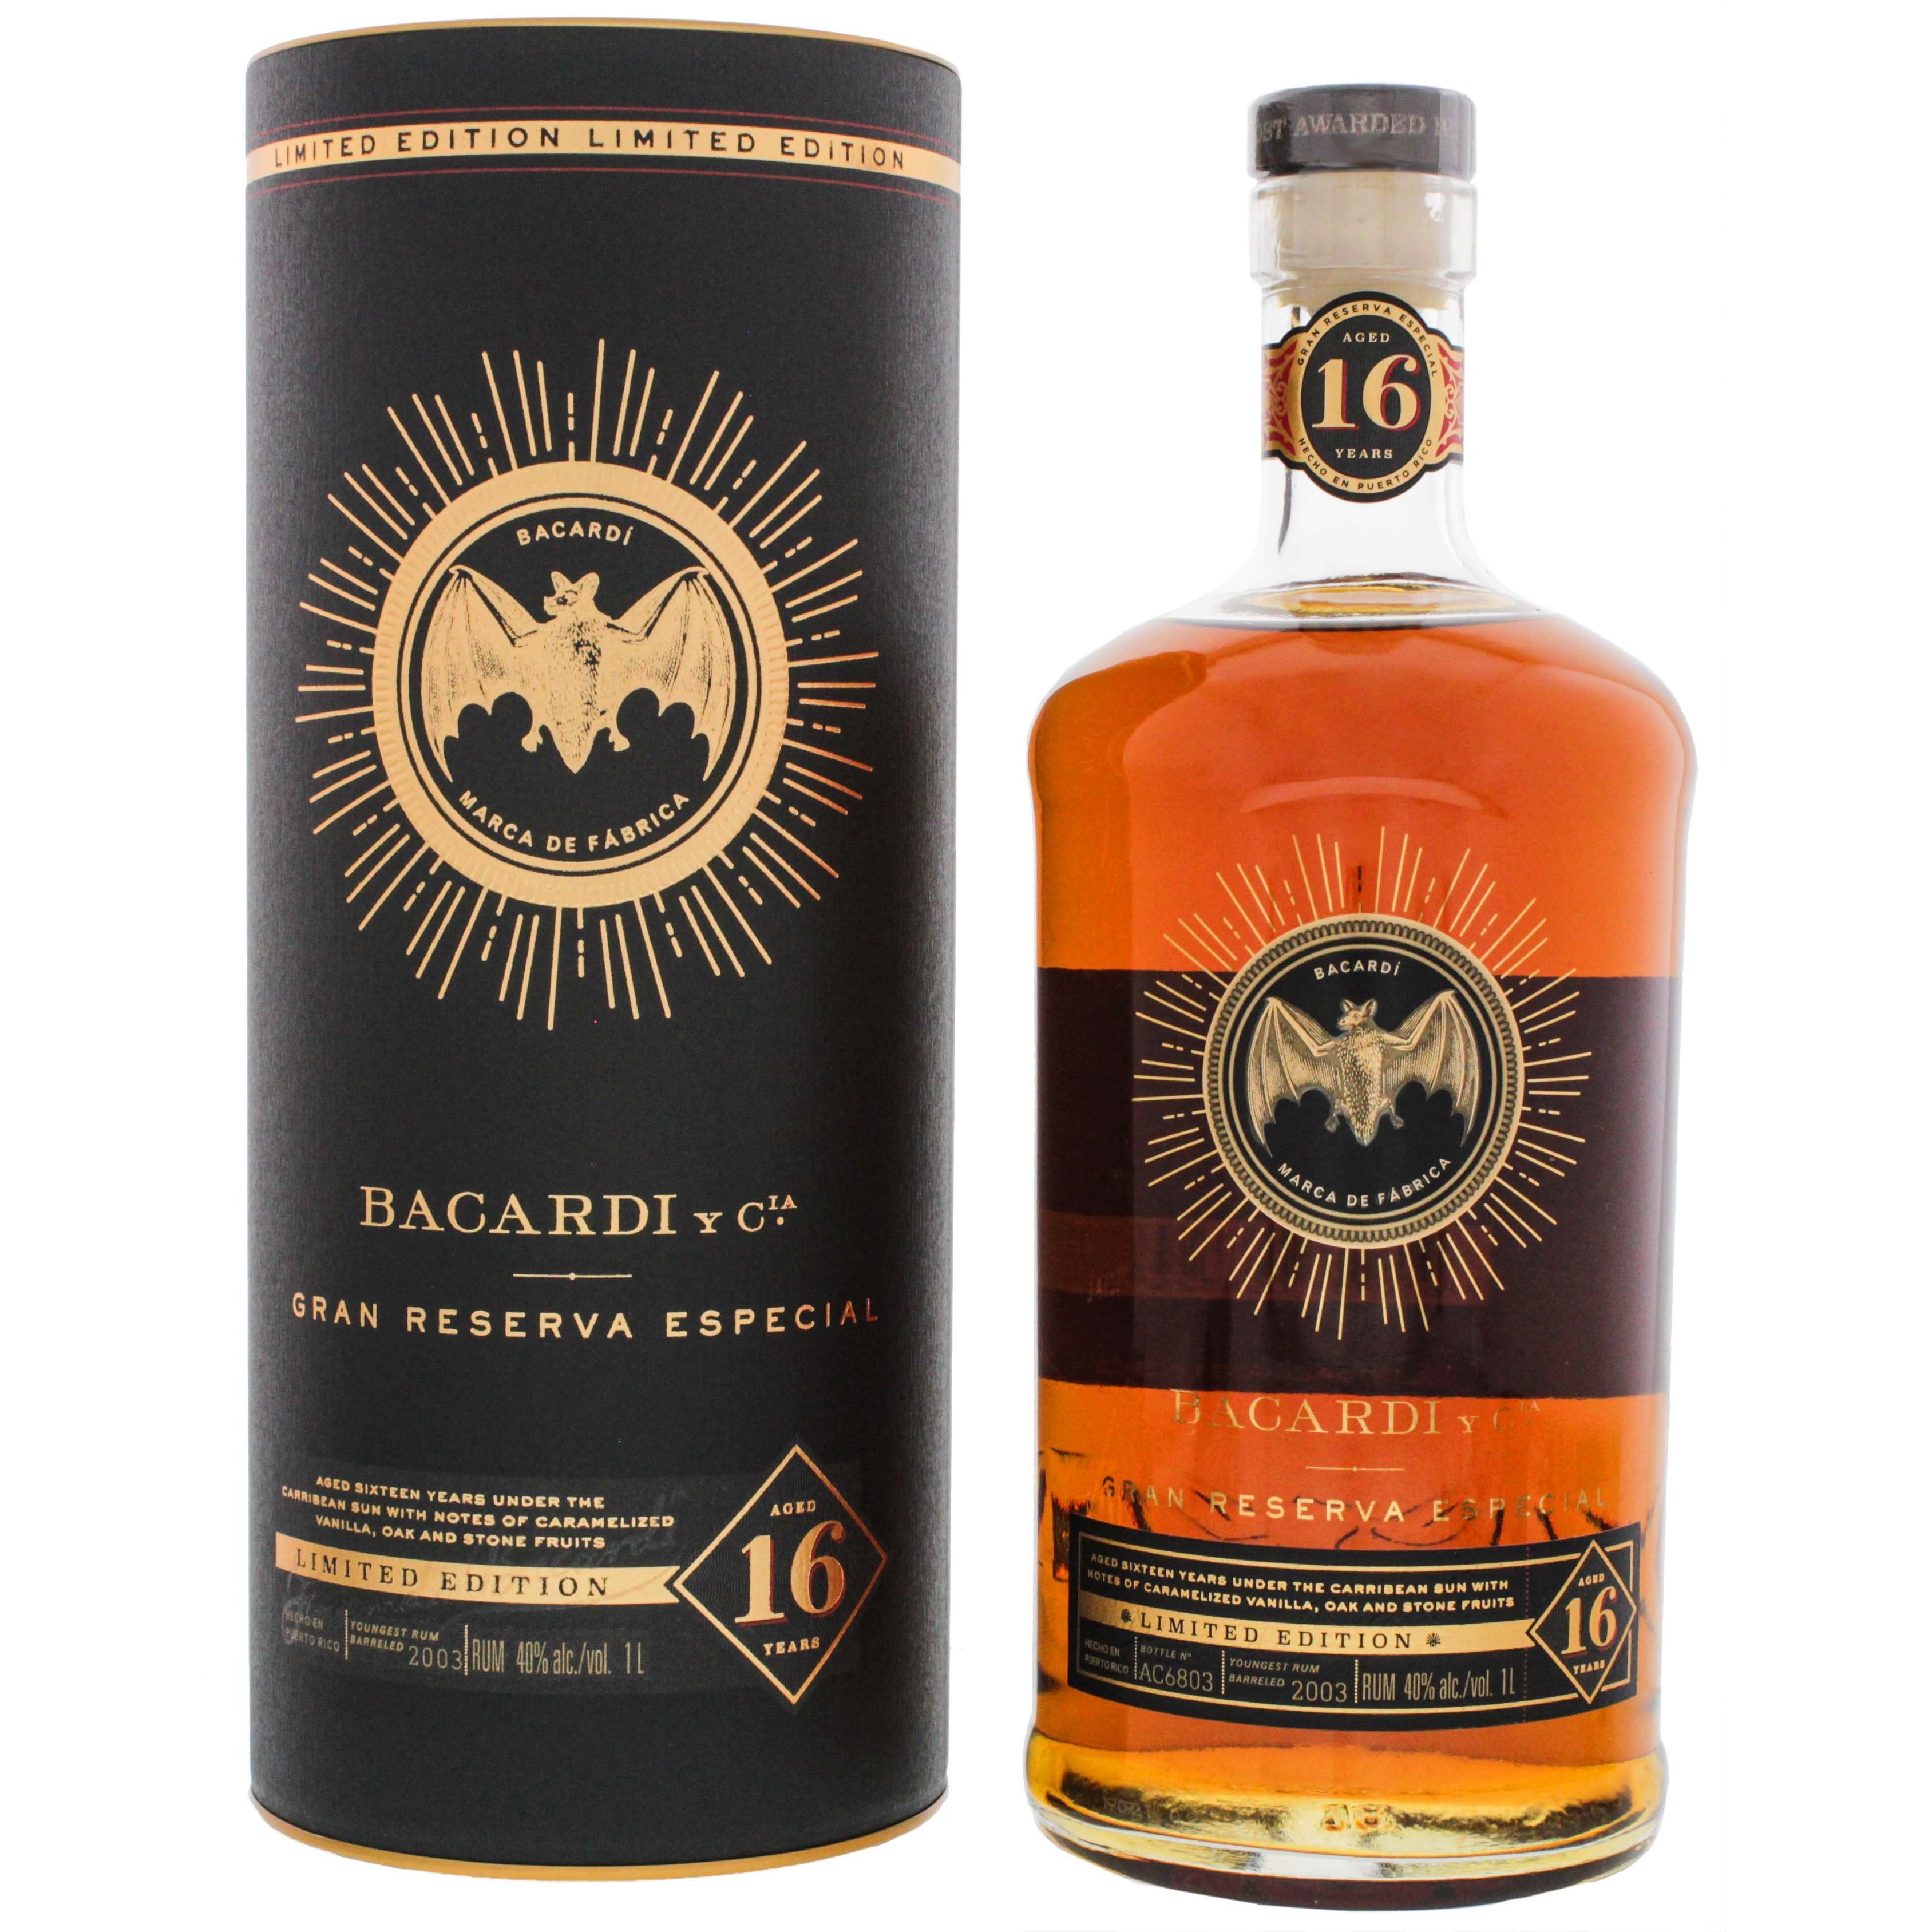 Bacardi 16 Years Old Gran Reserva Especial Limited Edition 40% Vol. 1l in Giftbox